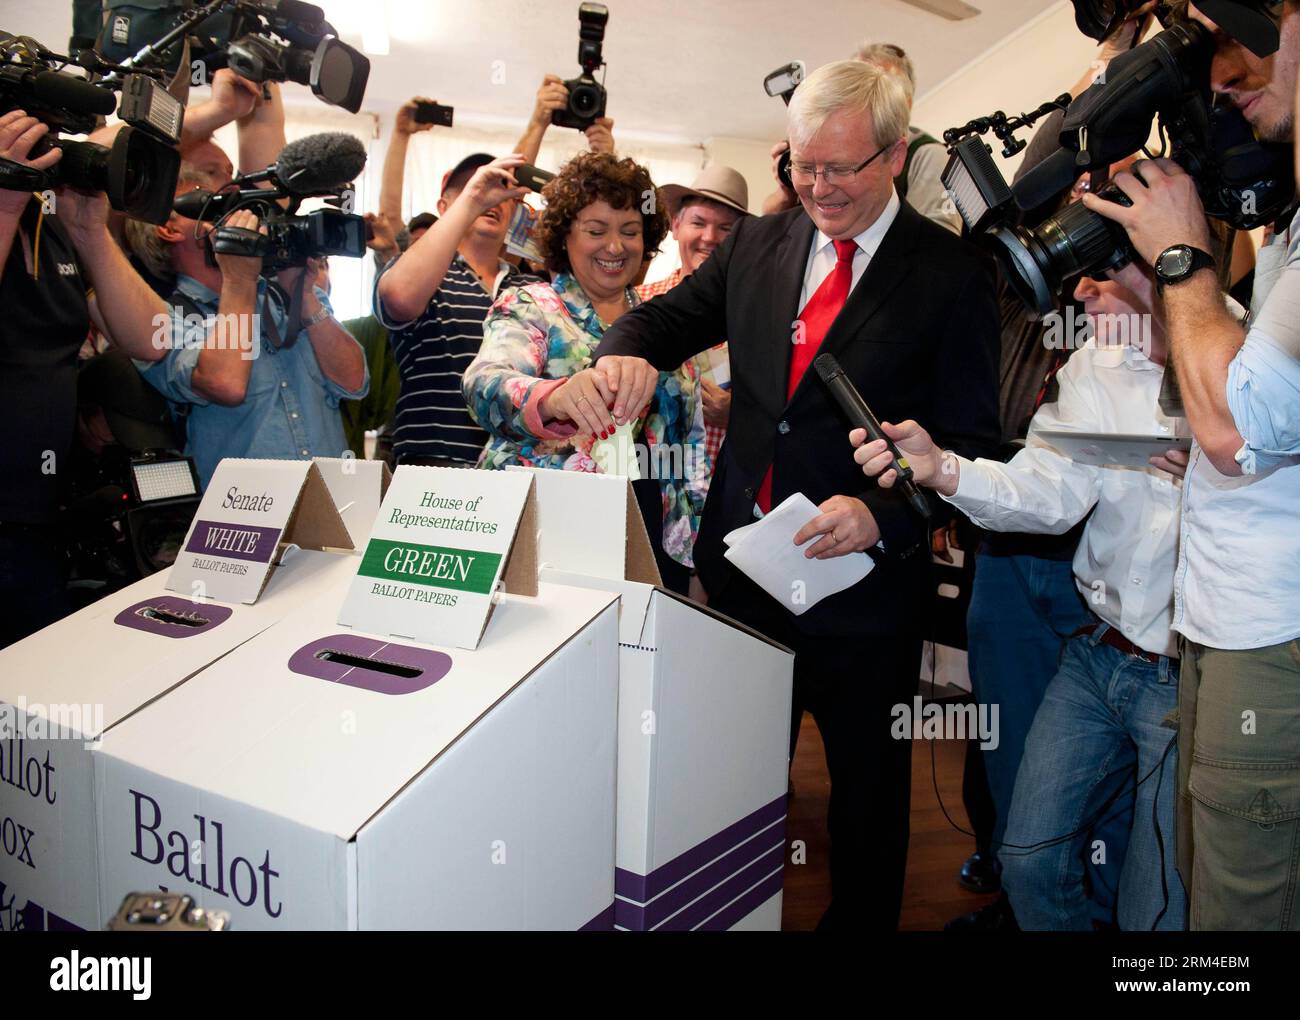 Bildnummer: 60444128  Datum: 07.09.2013  Copyright: imago/Xinhua Australian Prime Minister Kevin Rudd (R) and wife Therese Rein cast vote at a polling station in Brisbane, Australia, Sept. 7, 2013. Australia held parliamentary election on Saturday. (Xinhua/Bai Xue) AUSTRALIA-PARLIAMENTARY ELECTION-VOTING PUBLICATIONxNOTxINxCHN People Politik Wahl Parlamentswahl Stimmabgabe xns x1x 2013 quer premiumd o0 Familie, privat frau     60444128 Date 07 09 2013 Copyright Imago XINHUA Australian Prime Ministers Kevin Rudd r and wife Therese pure Cast VOTE AT a Polling Station in Brisbane Australia Sept 7 Stock Photo